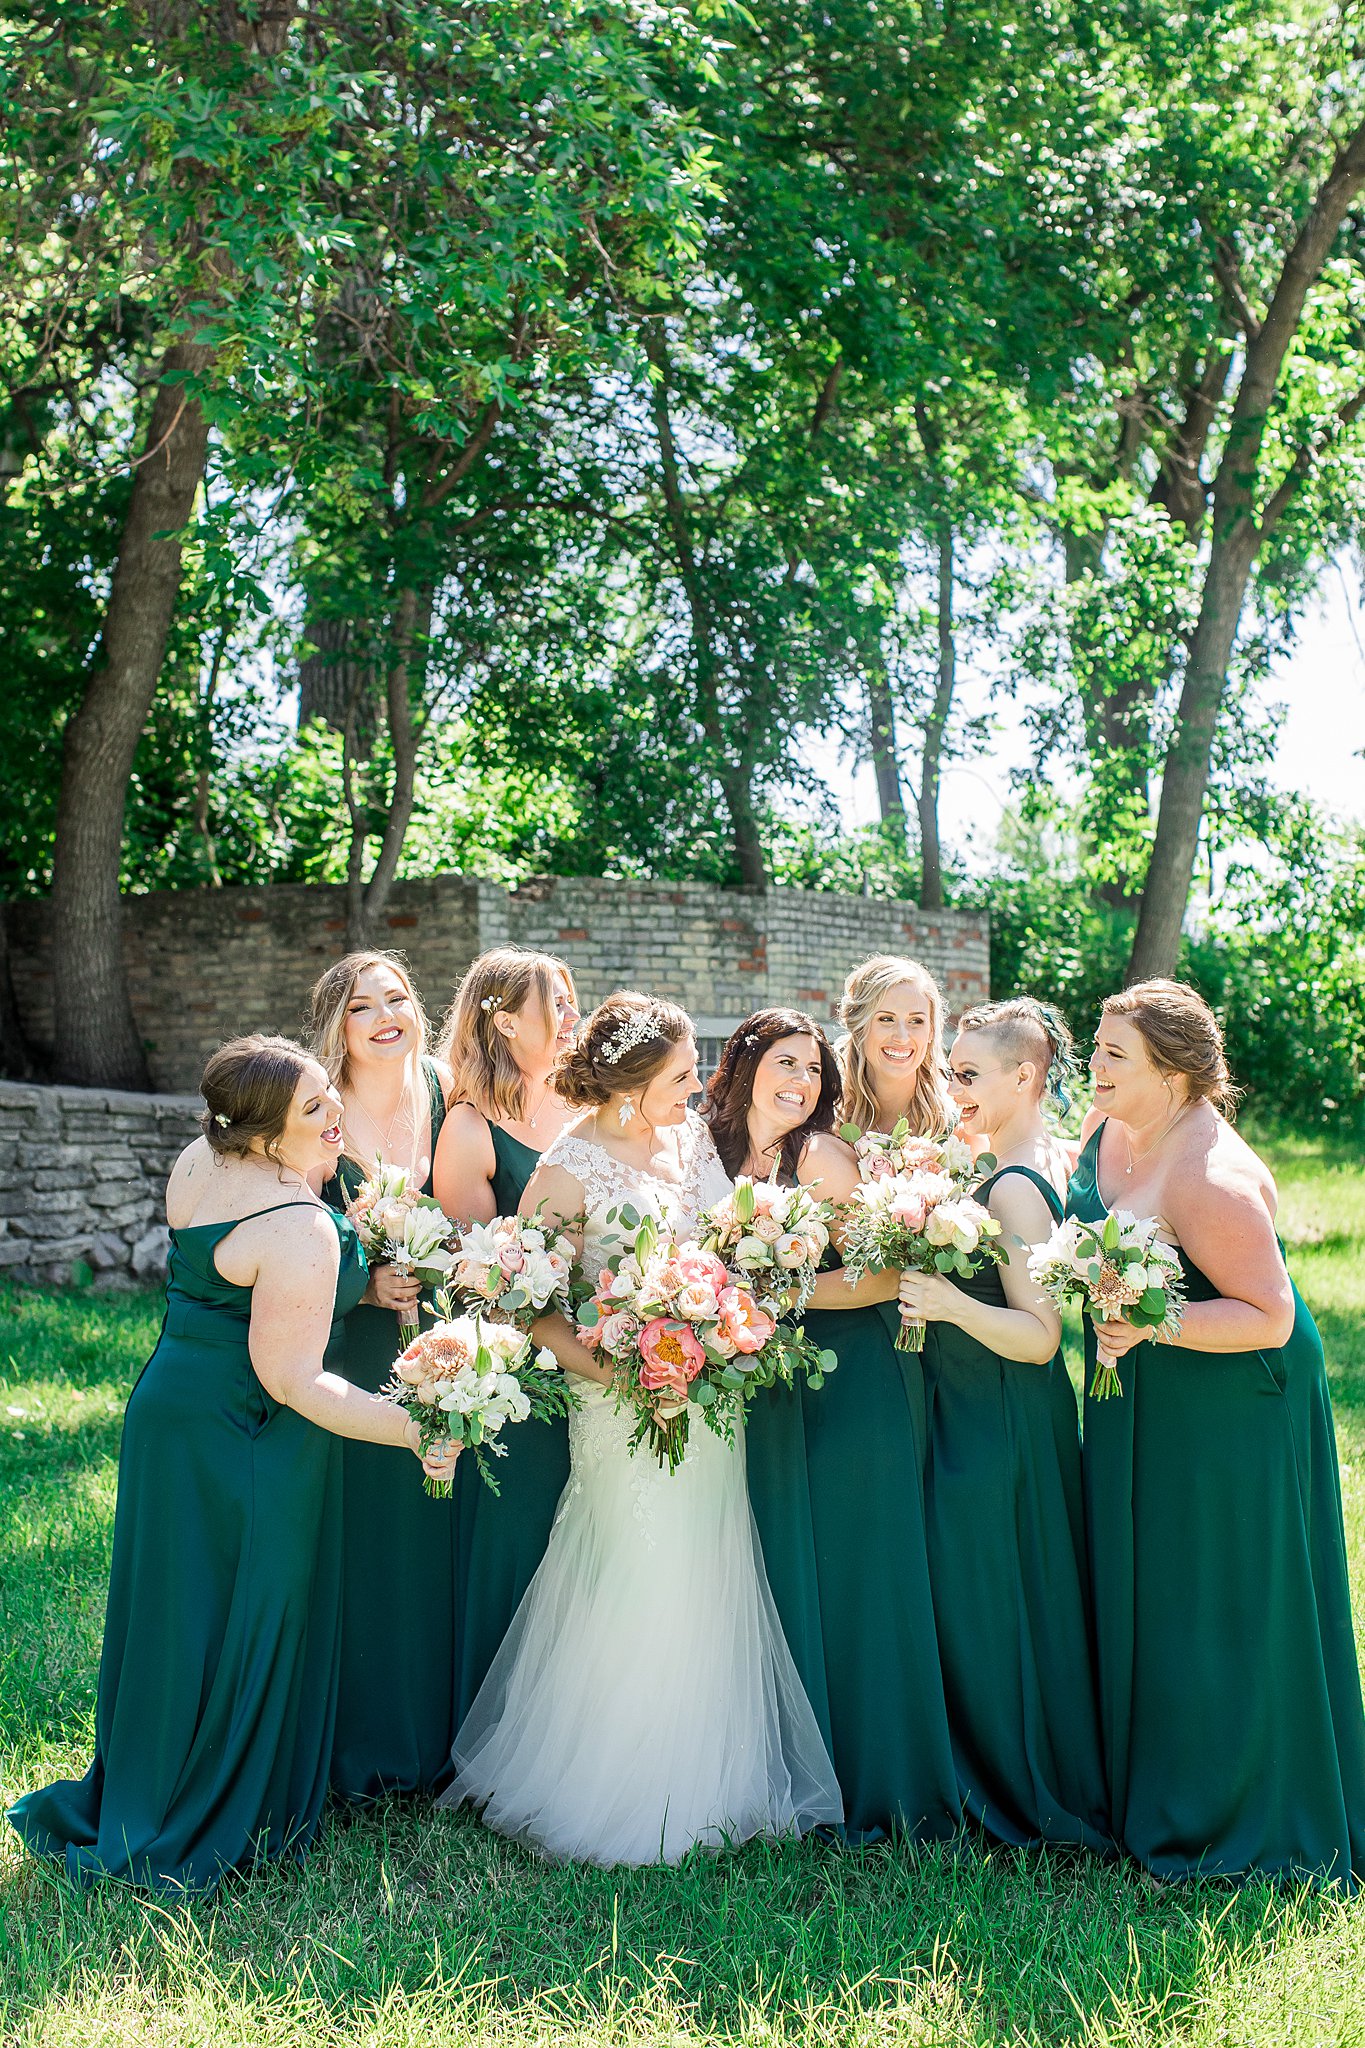 Bridesmaids portrait at Riverhaven Wedding Venue in Moorhead MN by Abby Anderson Wedding Photographer